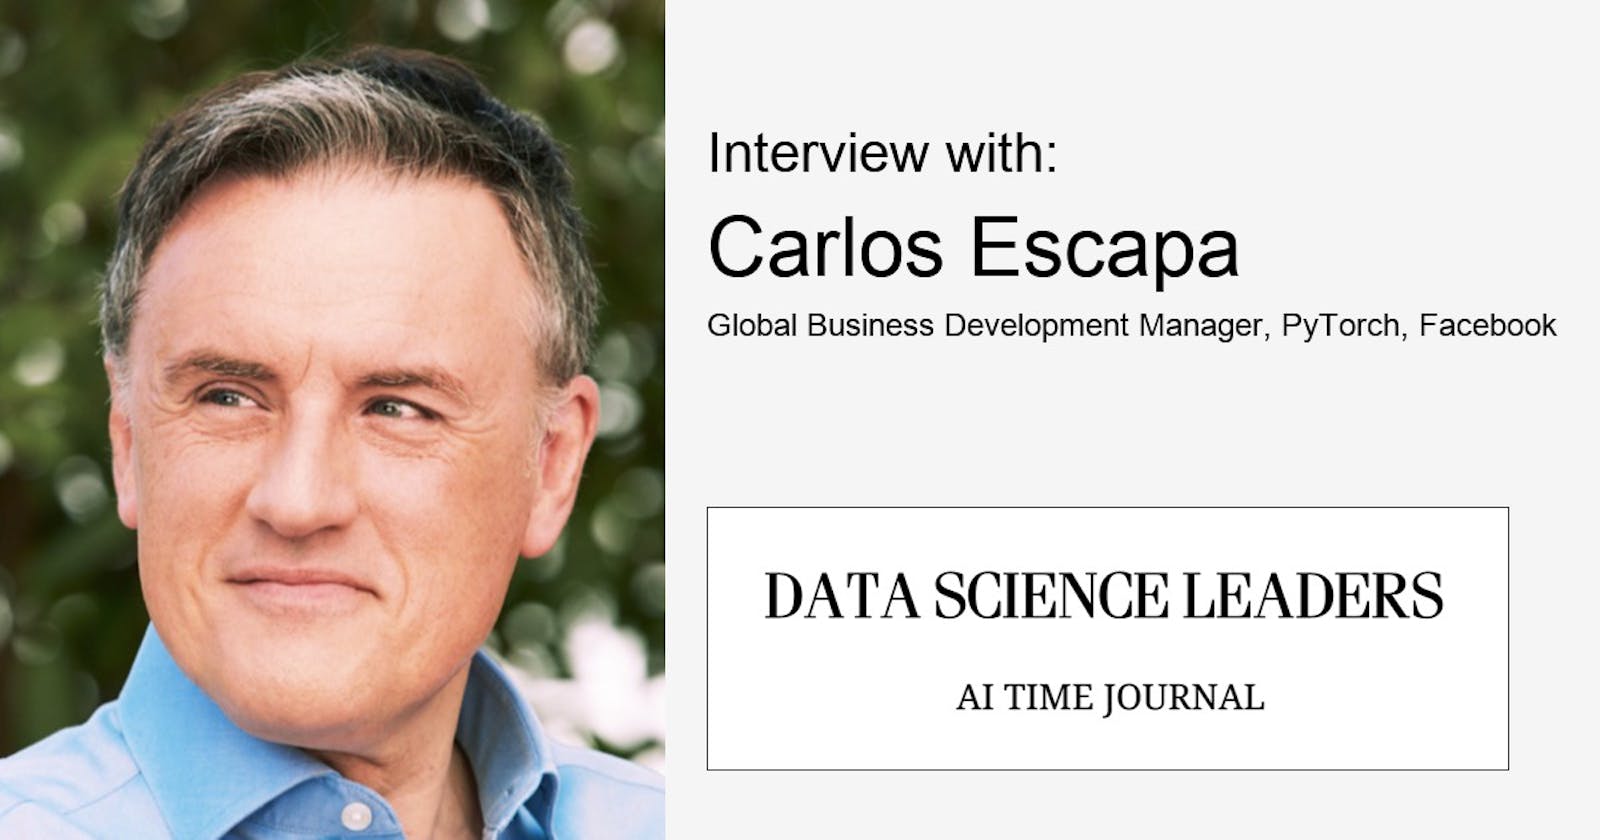 Advances in AI Research, Power of Open-Source Projects and More – Interview with Carlos Escapa, PyTorch, Facebook